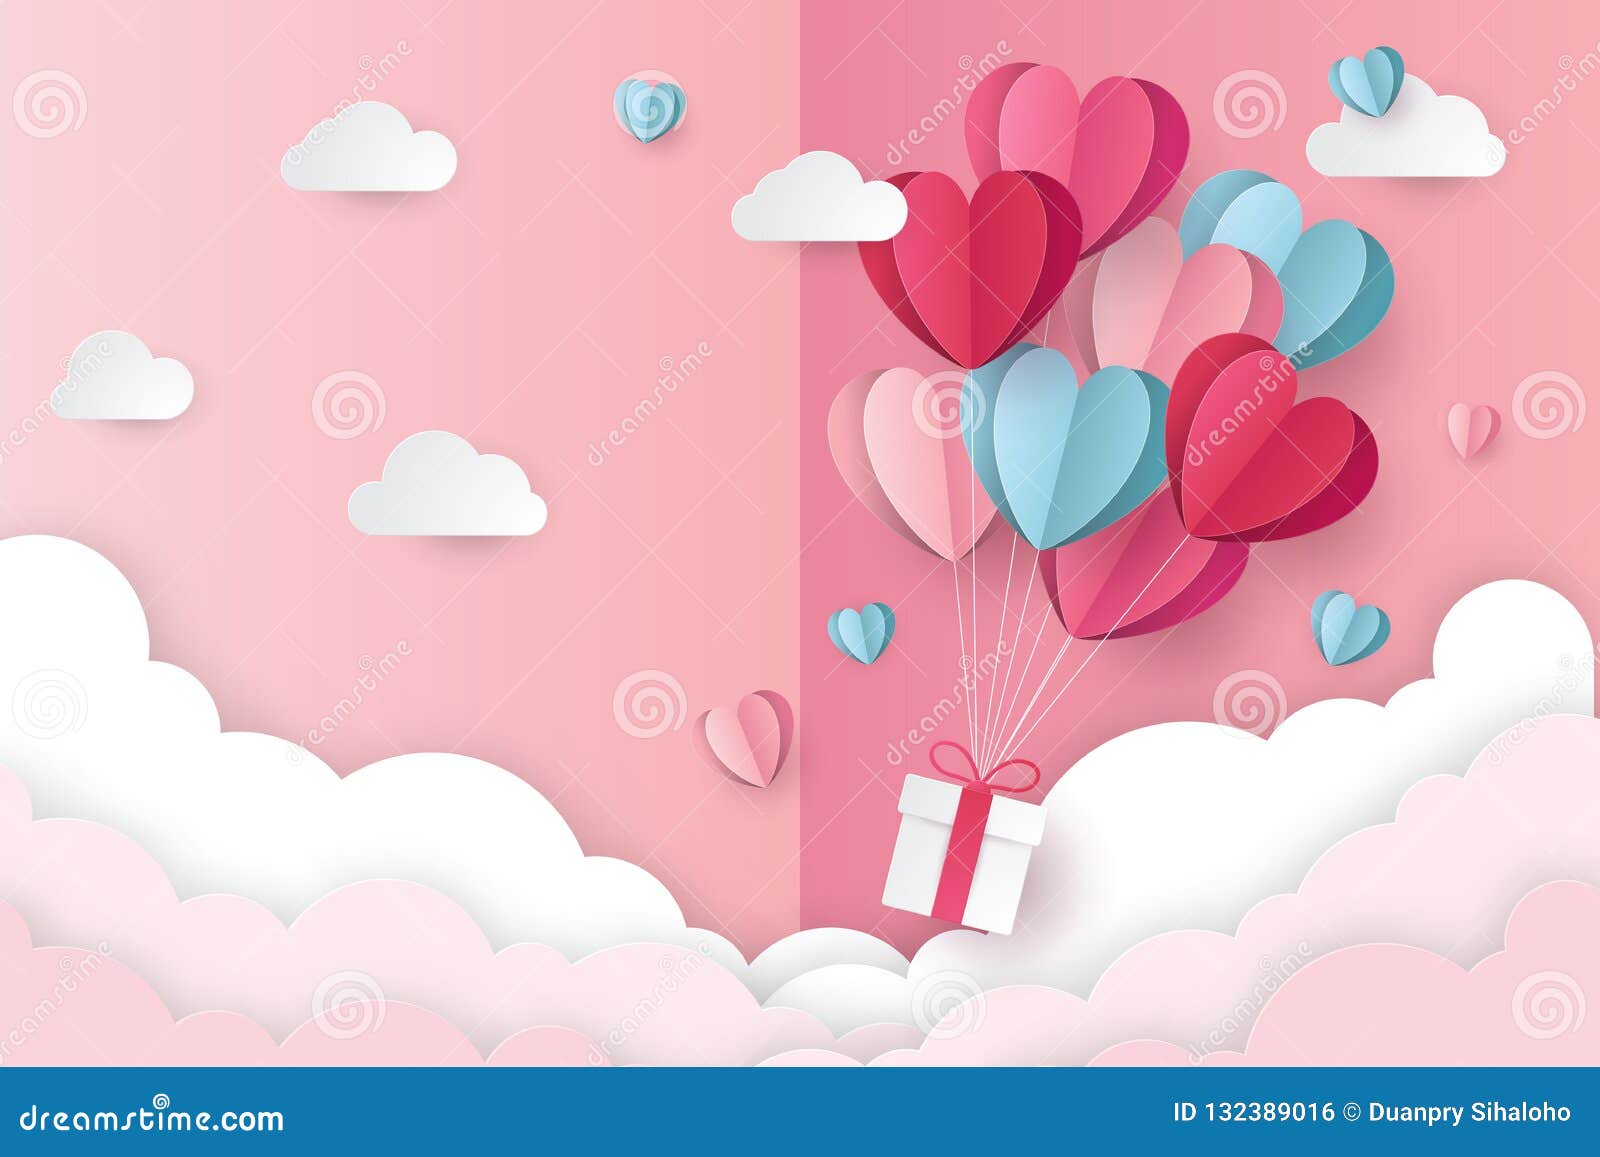  of love and valentine day with heart baloon, gift and clouds.